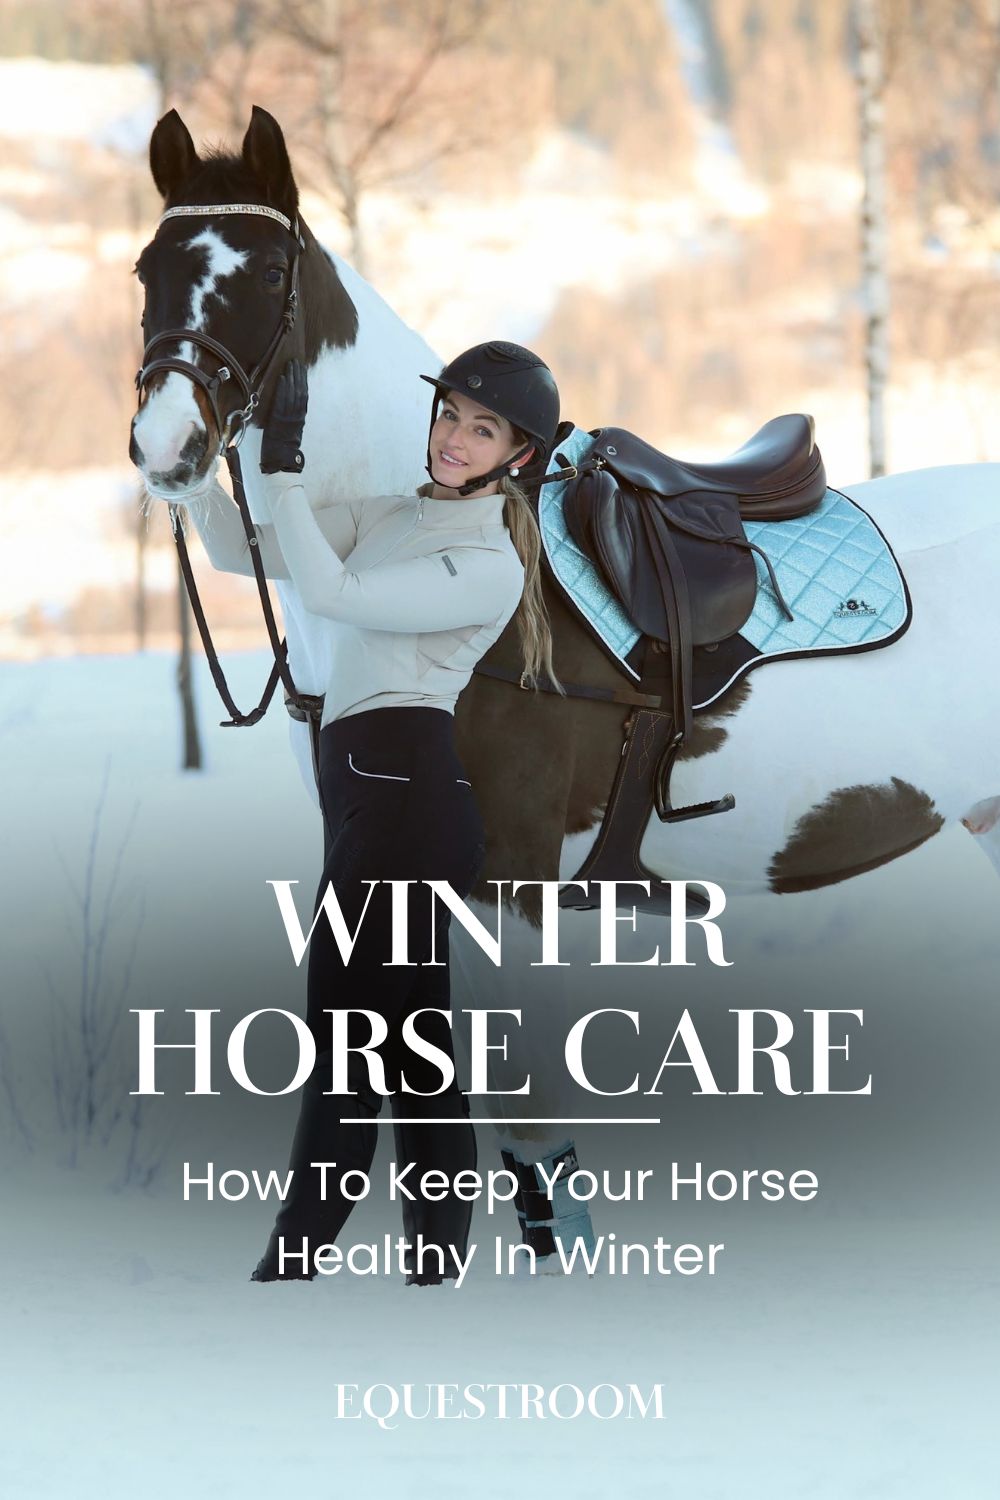 WINTER HORSE CARE TIPS